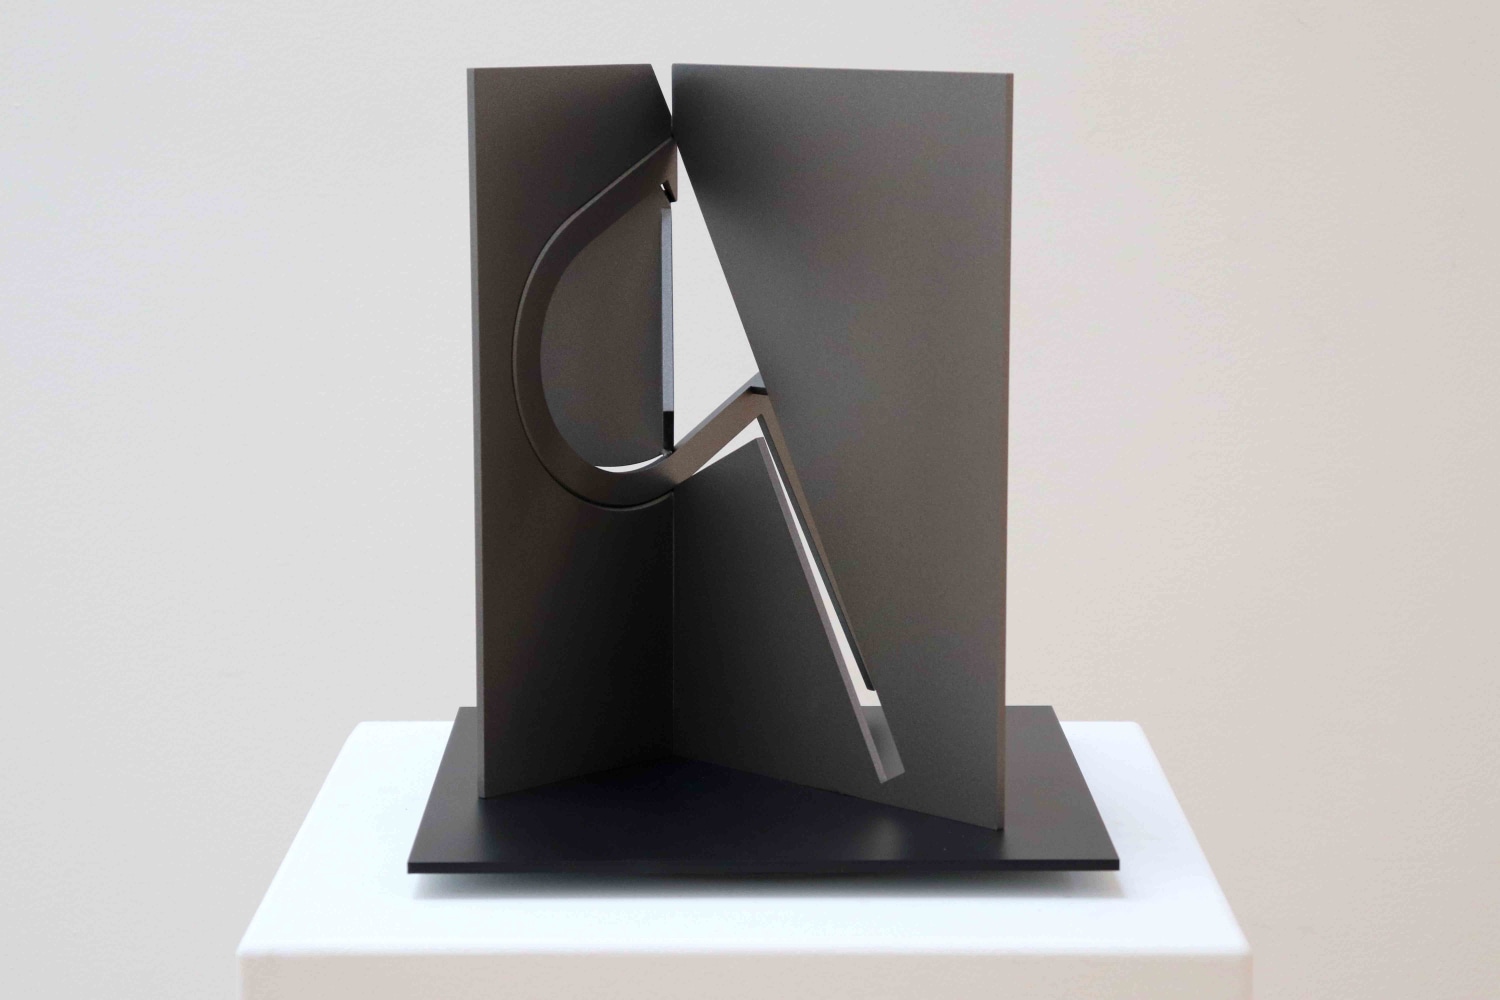 Folded Square Alphabet P, A.P.

2011

Painted Steel

12 x 12 x 12 inches

30.5 x 30.5 x 30.5cm